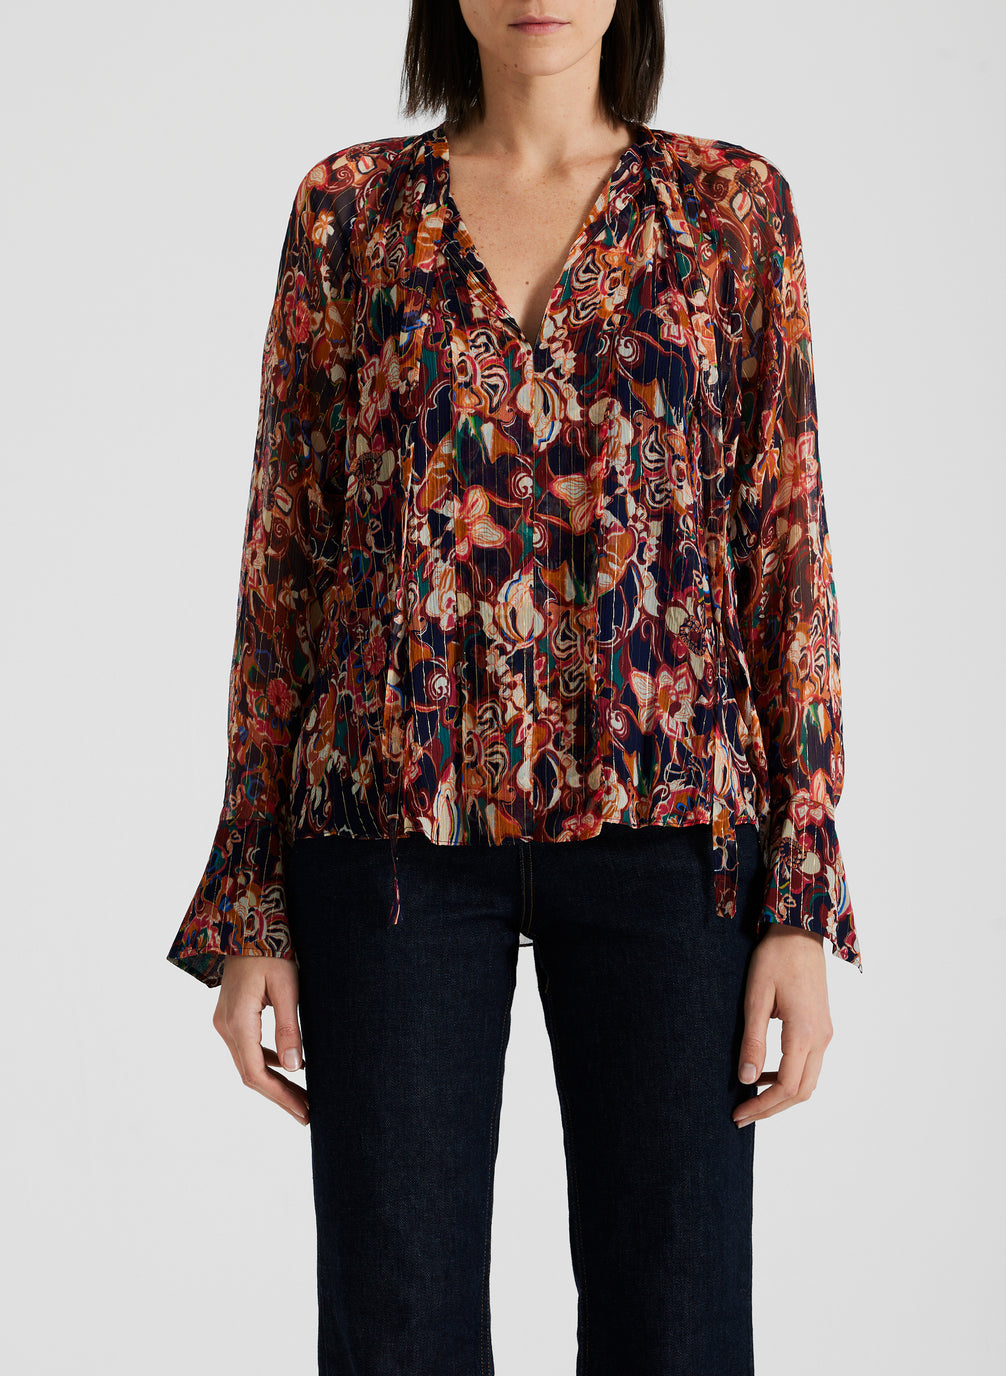 detail view of woman wearing silk long sleeve printed blouse and black pants